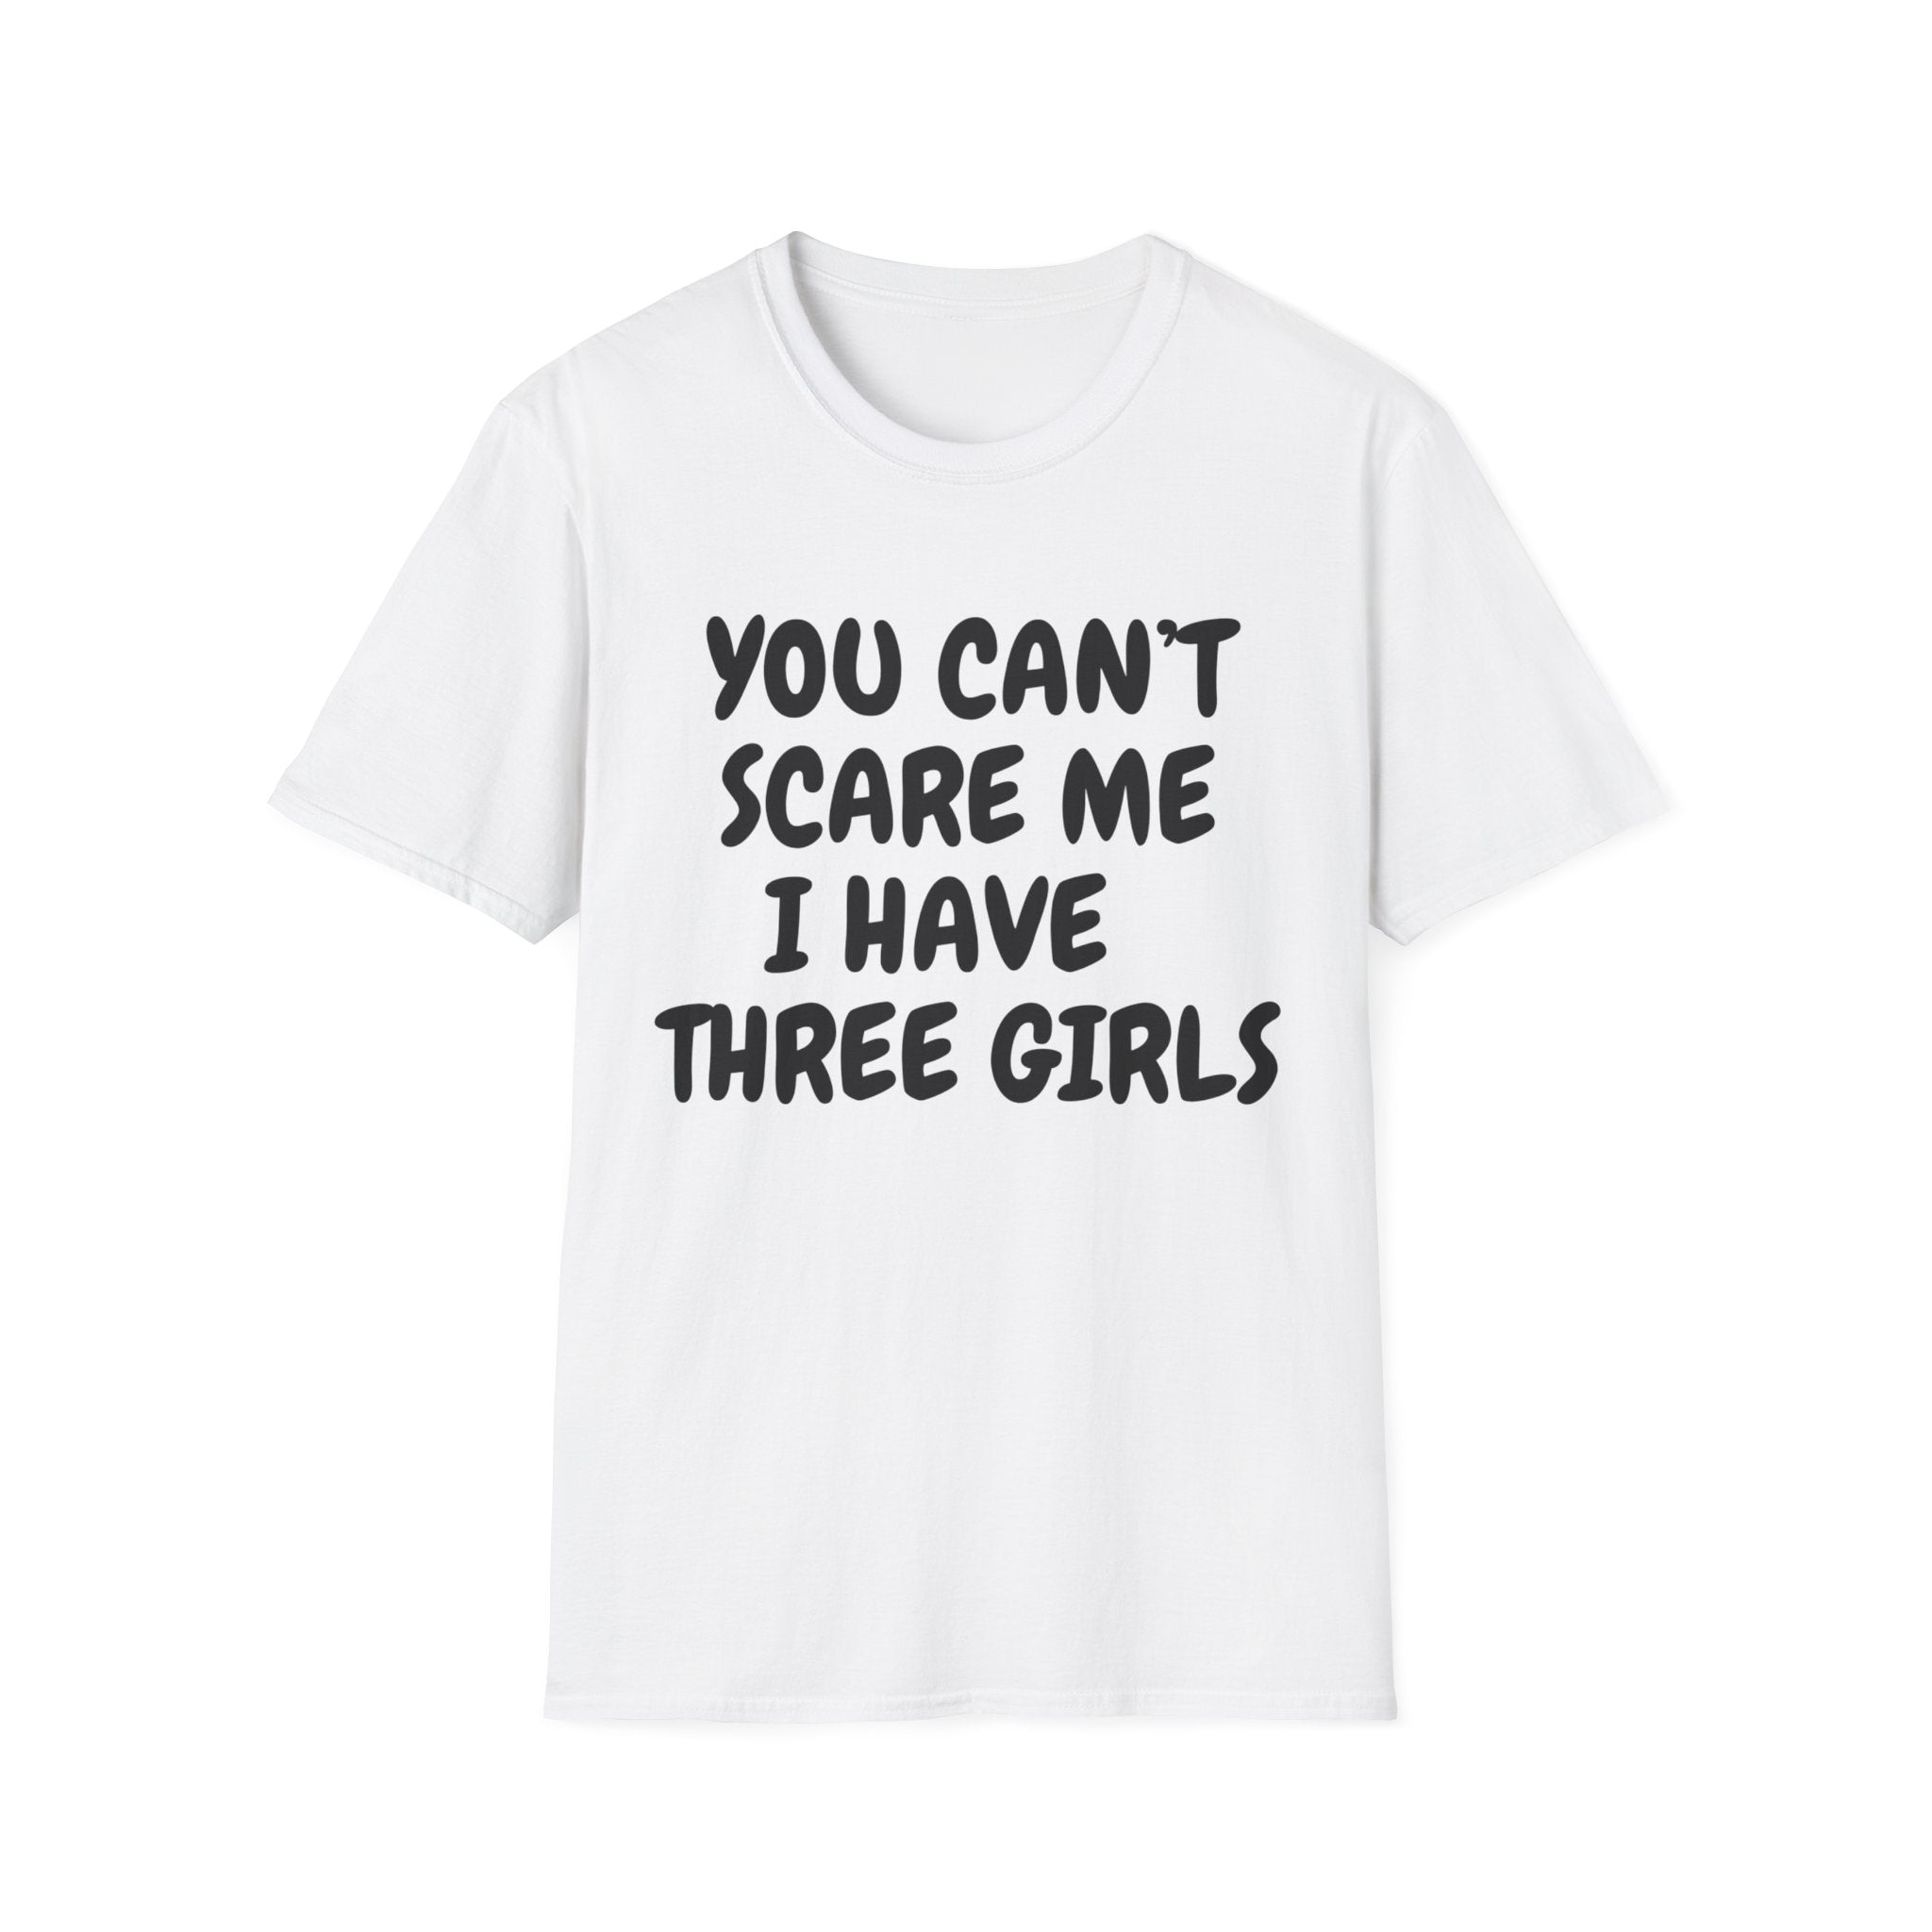 Father's Day Gift You Can't Scare Me I have Three Girls Funny Dad T-shirt, Father's Day Gift, Gift for Dad, Dad Shirt, Men's T-shirt